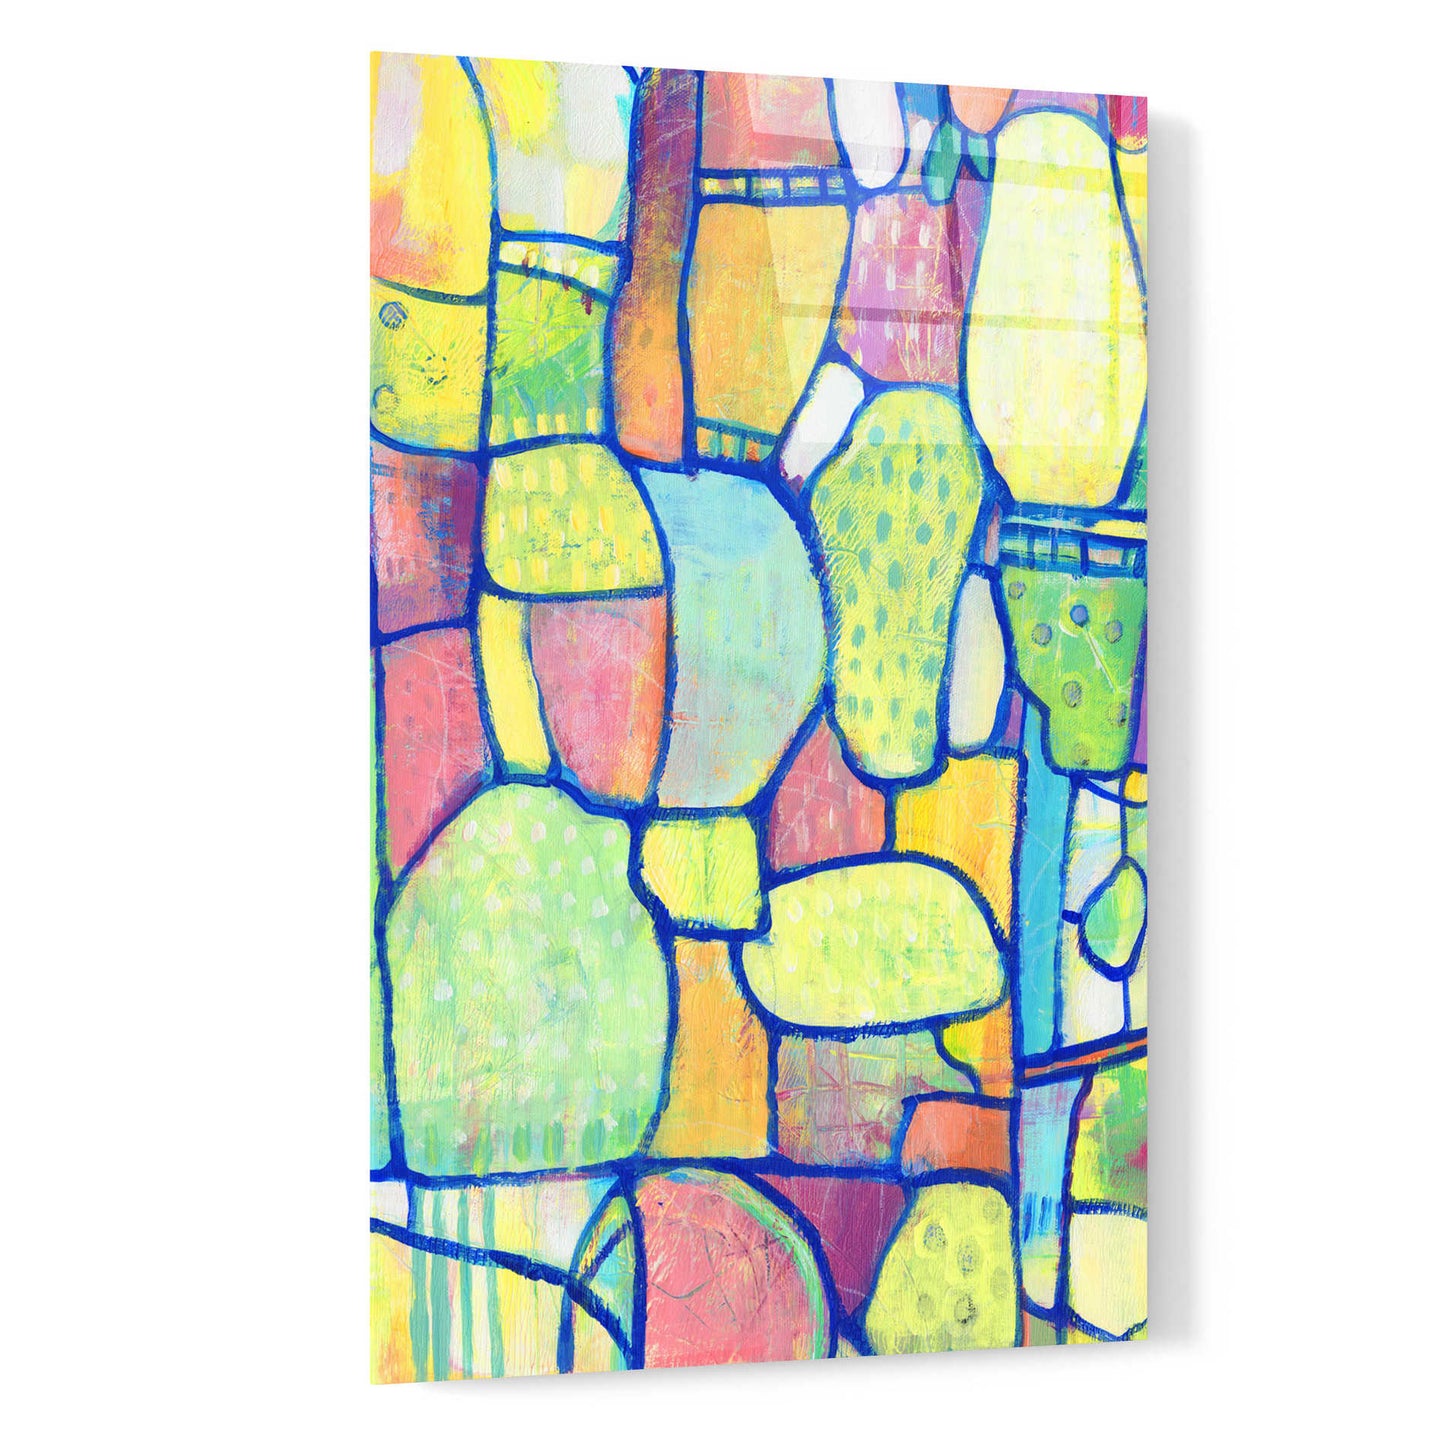 Epic Art 'Stained Glass Composition II' by Tim O'Toole, Acrylic Glass Wall Art,16x24